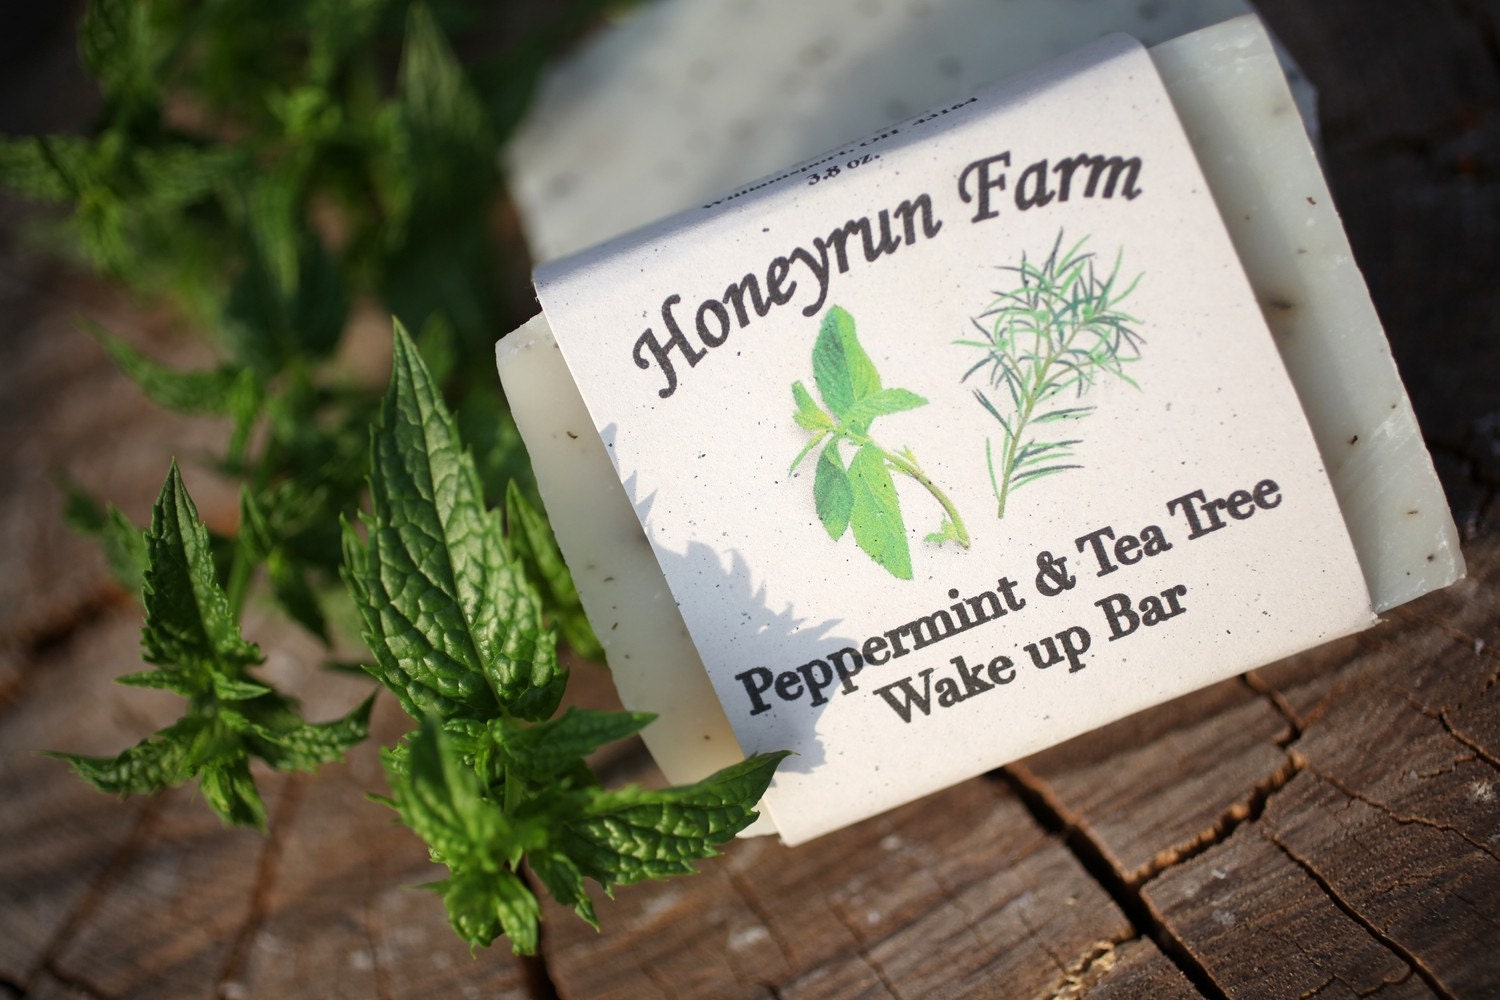 Peppermint & Tea Tree Wake Up Bar - made with honey and beeswax